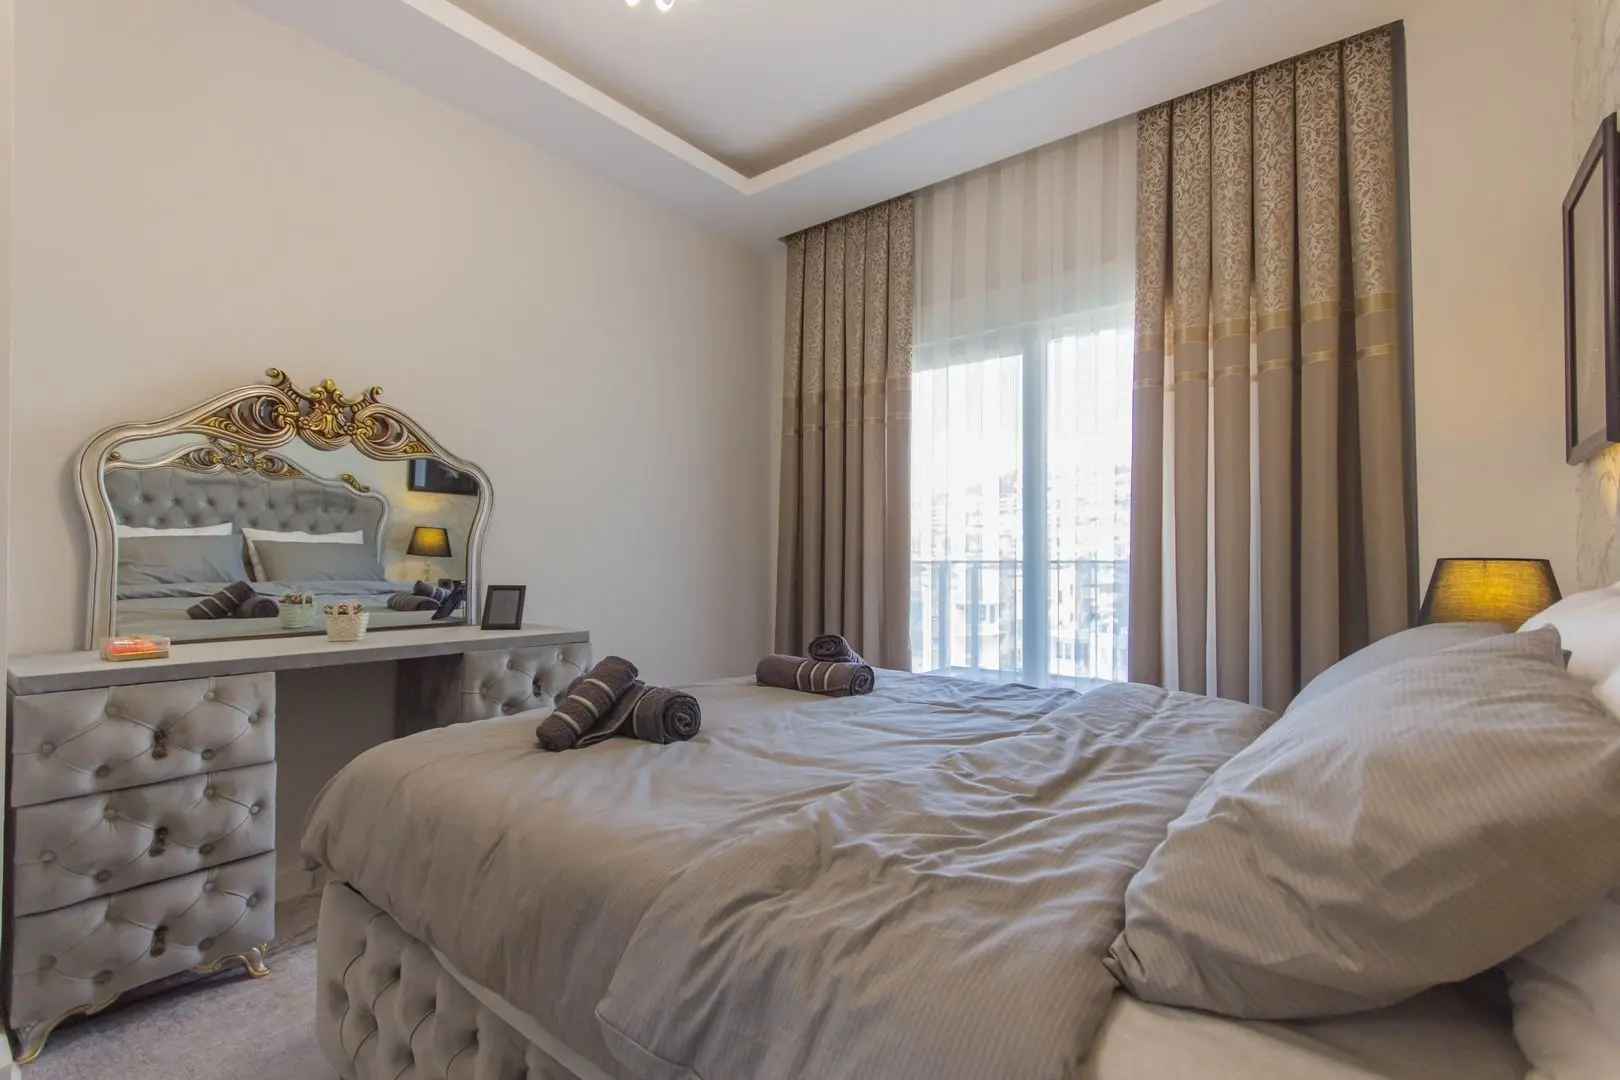 LUXURY 4+1 DUPLEX APARTMENT WITH SEA VIEW IN DEMIRTAŞ